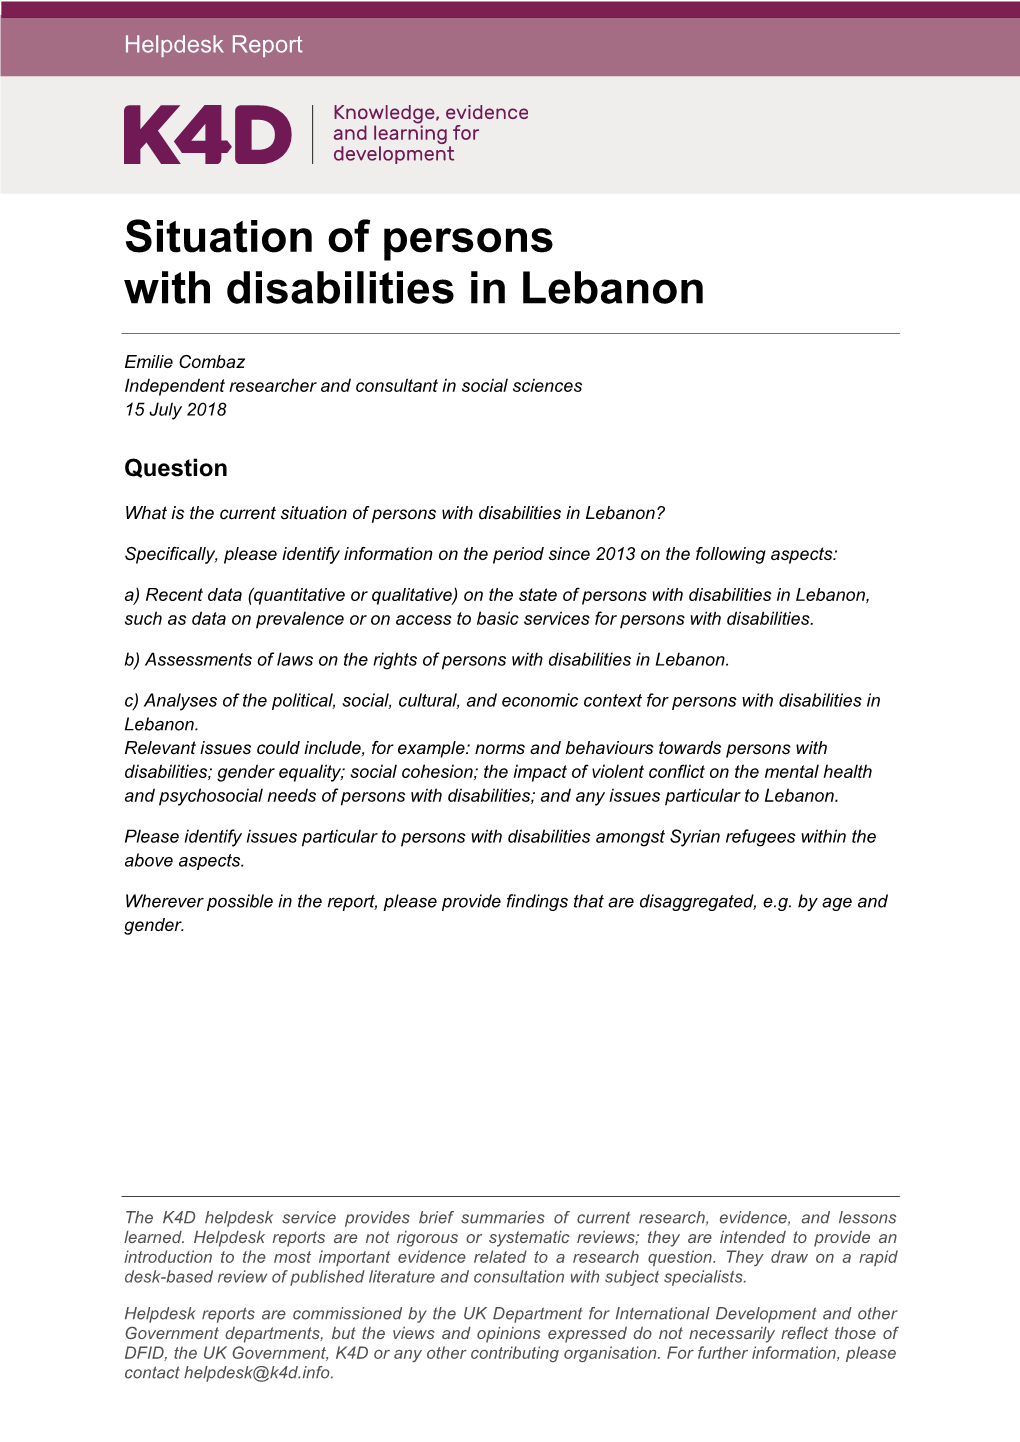 Situation of Persons with Disabilities in Lebanon